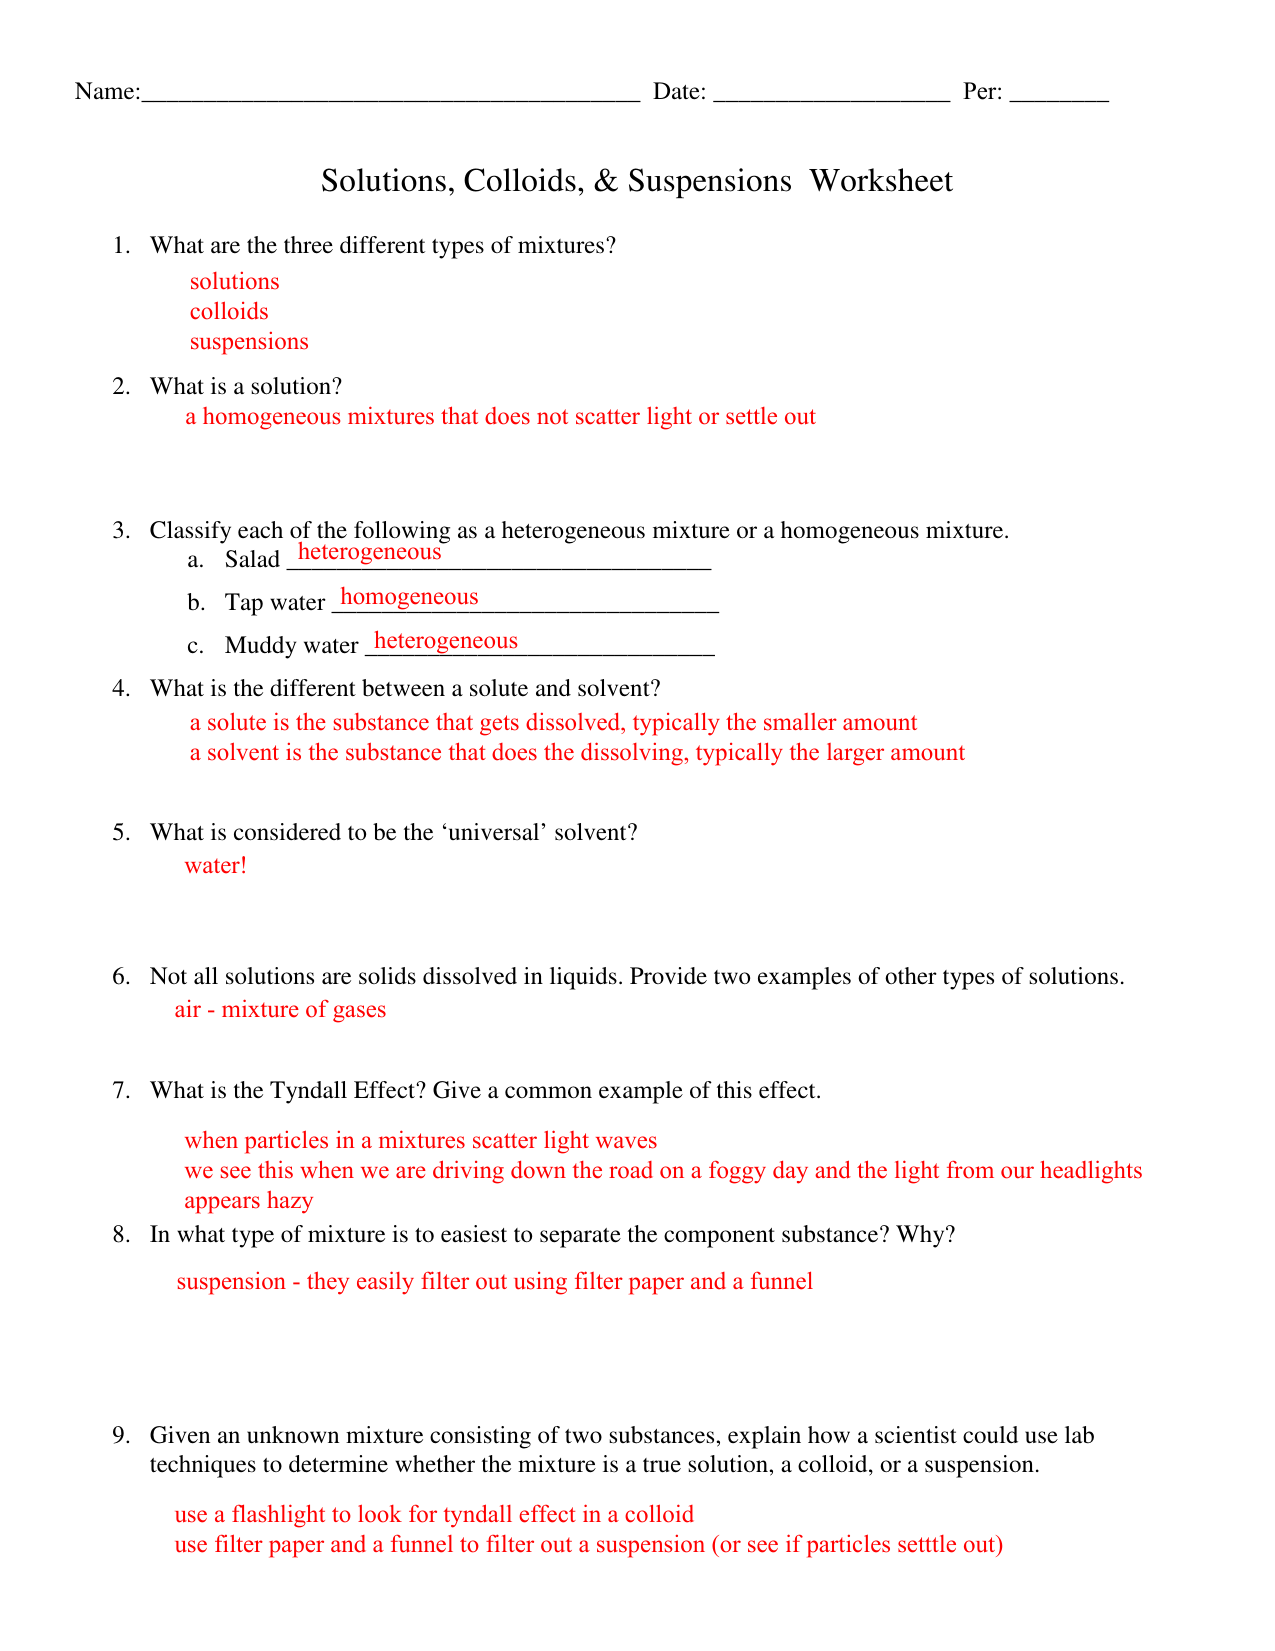 w-soltution colloid suspension key In Solutions Colloids And Suspensions Worksheet